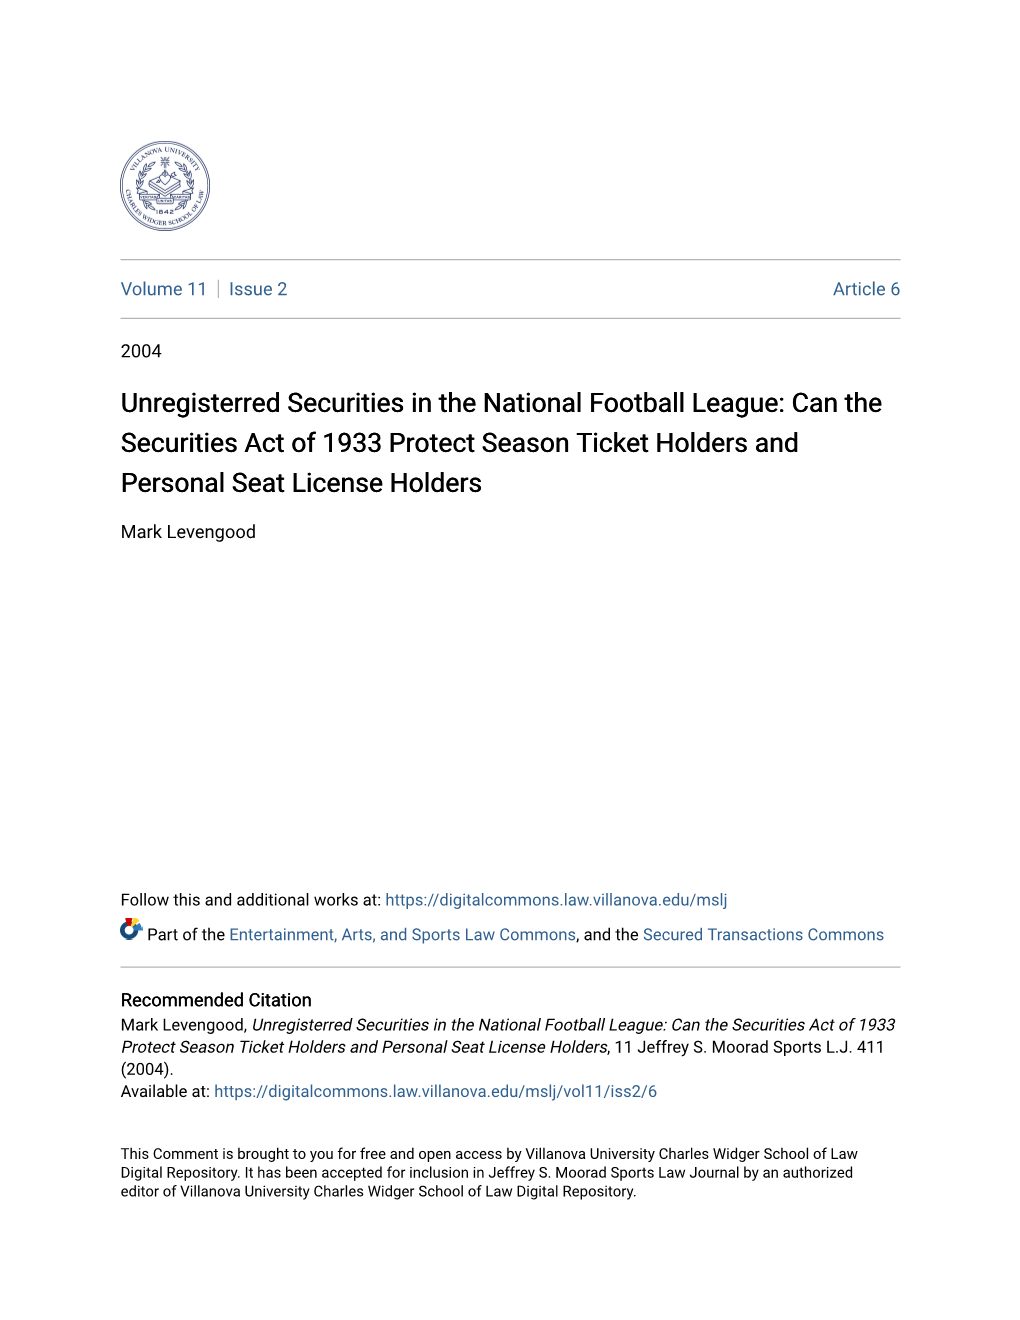 Unregisterred Securities in the National Football League: Can the Securities Act of 1933 Protect Season Ticket Holders and Personal Seat License Holders